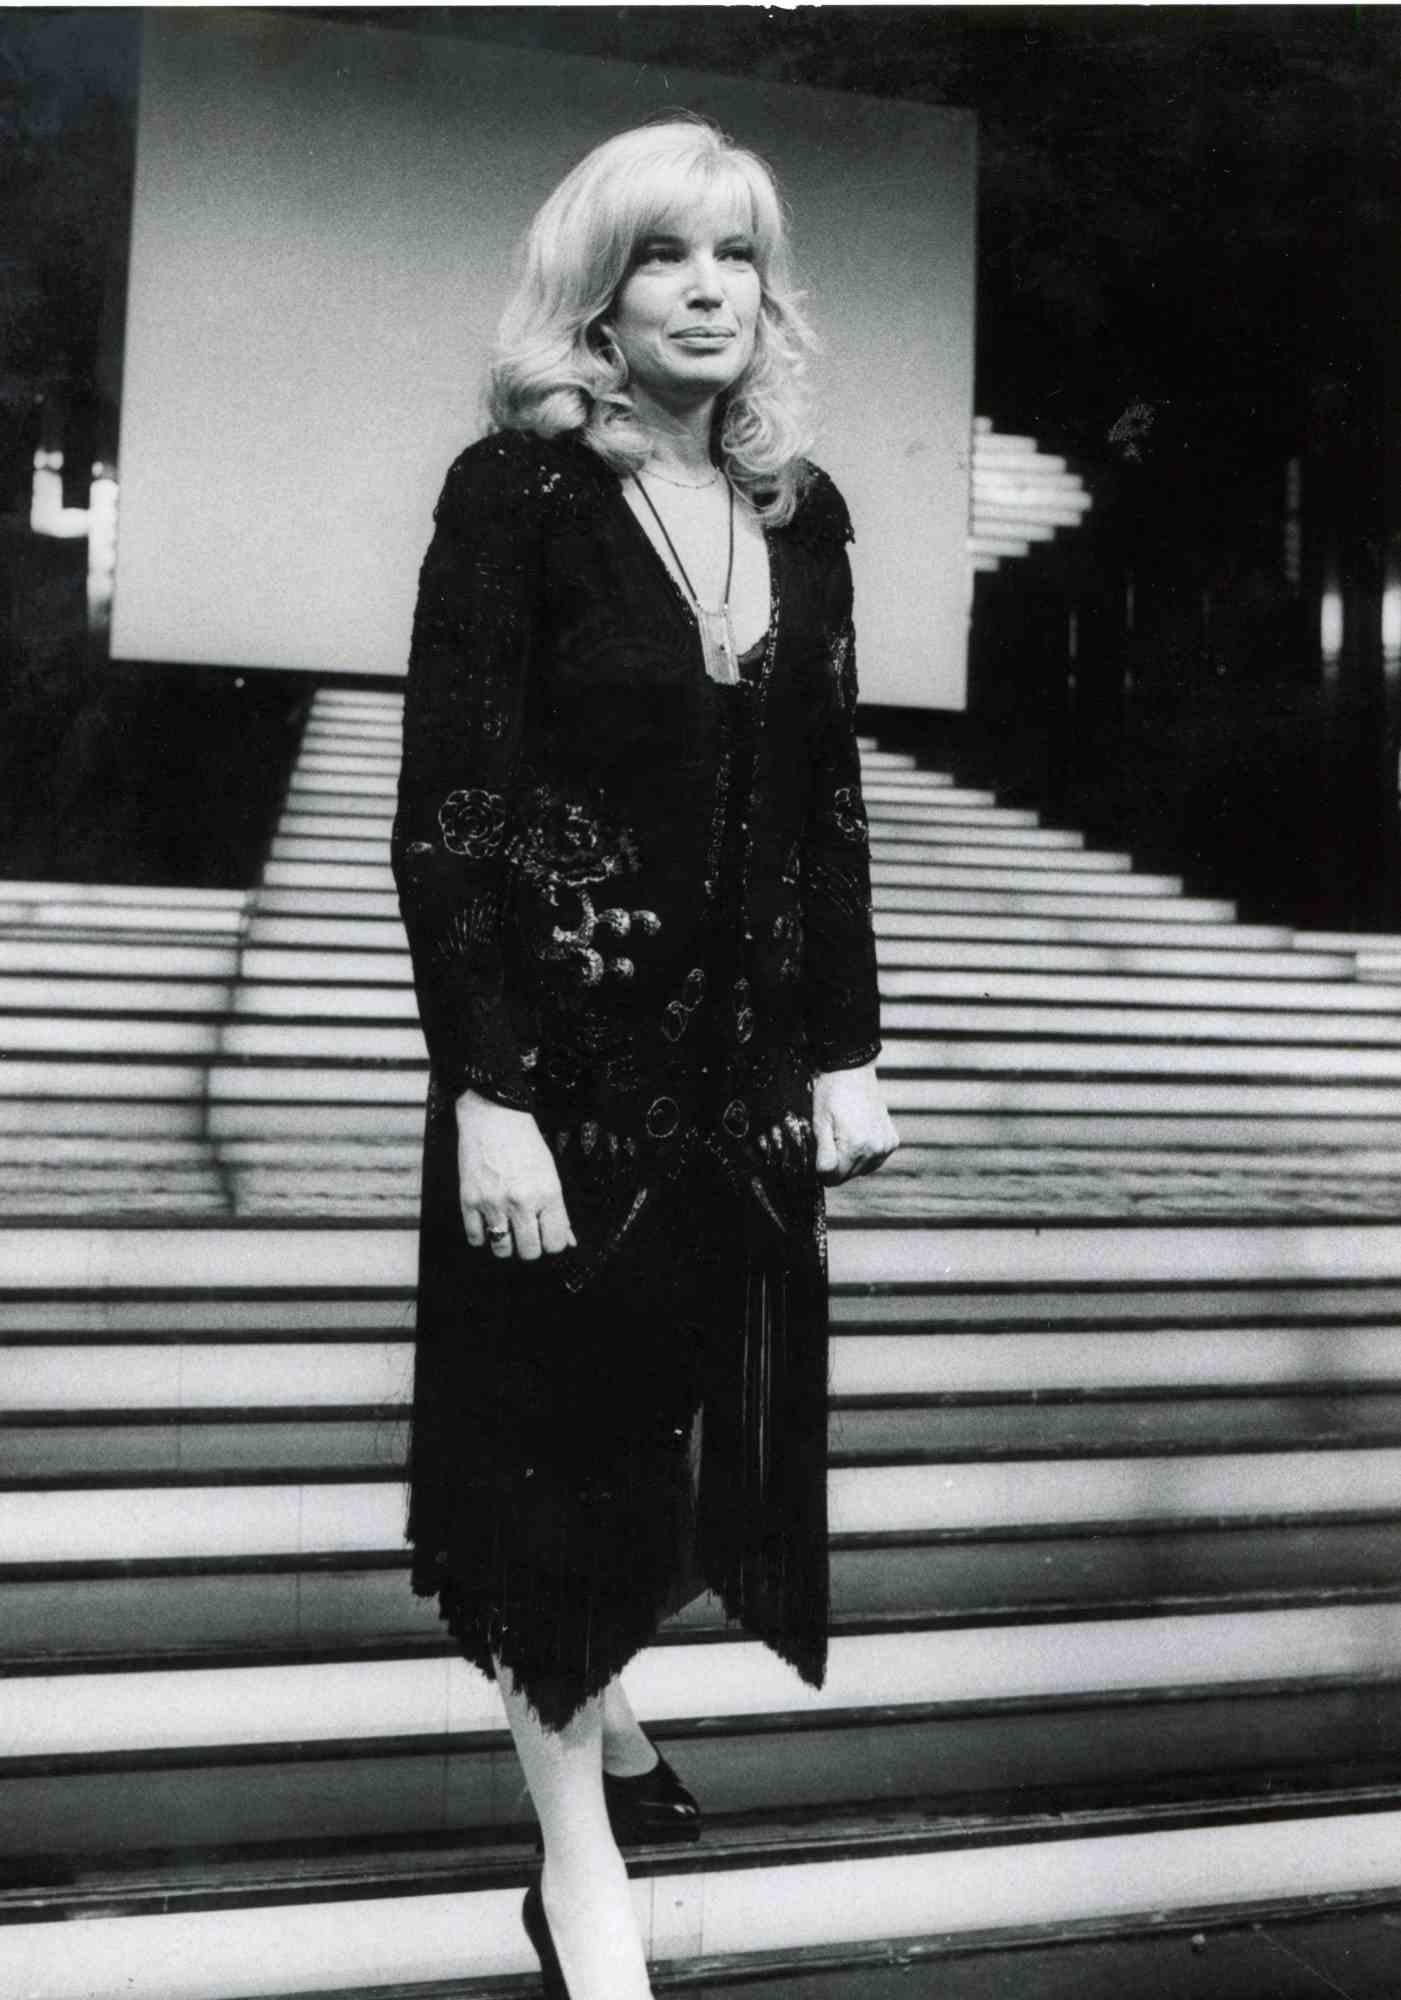 Unknown Black and White Photograph - Portrait of Monica Vitti - Vintage Black and White Photo - 1970s